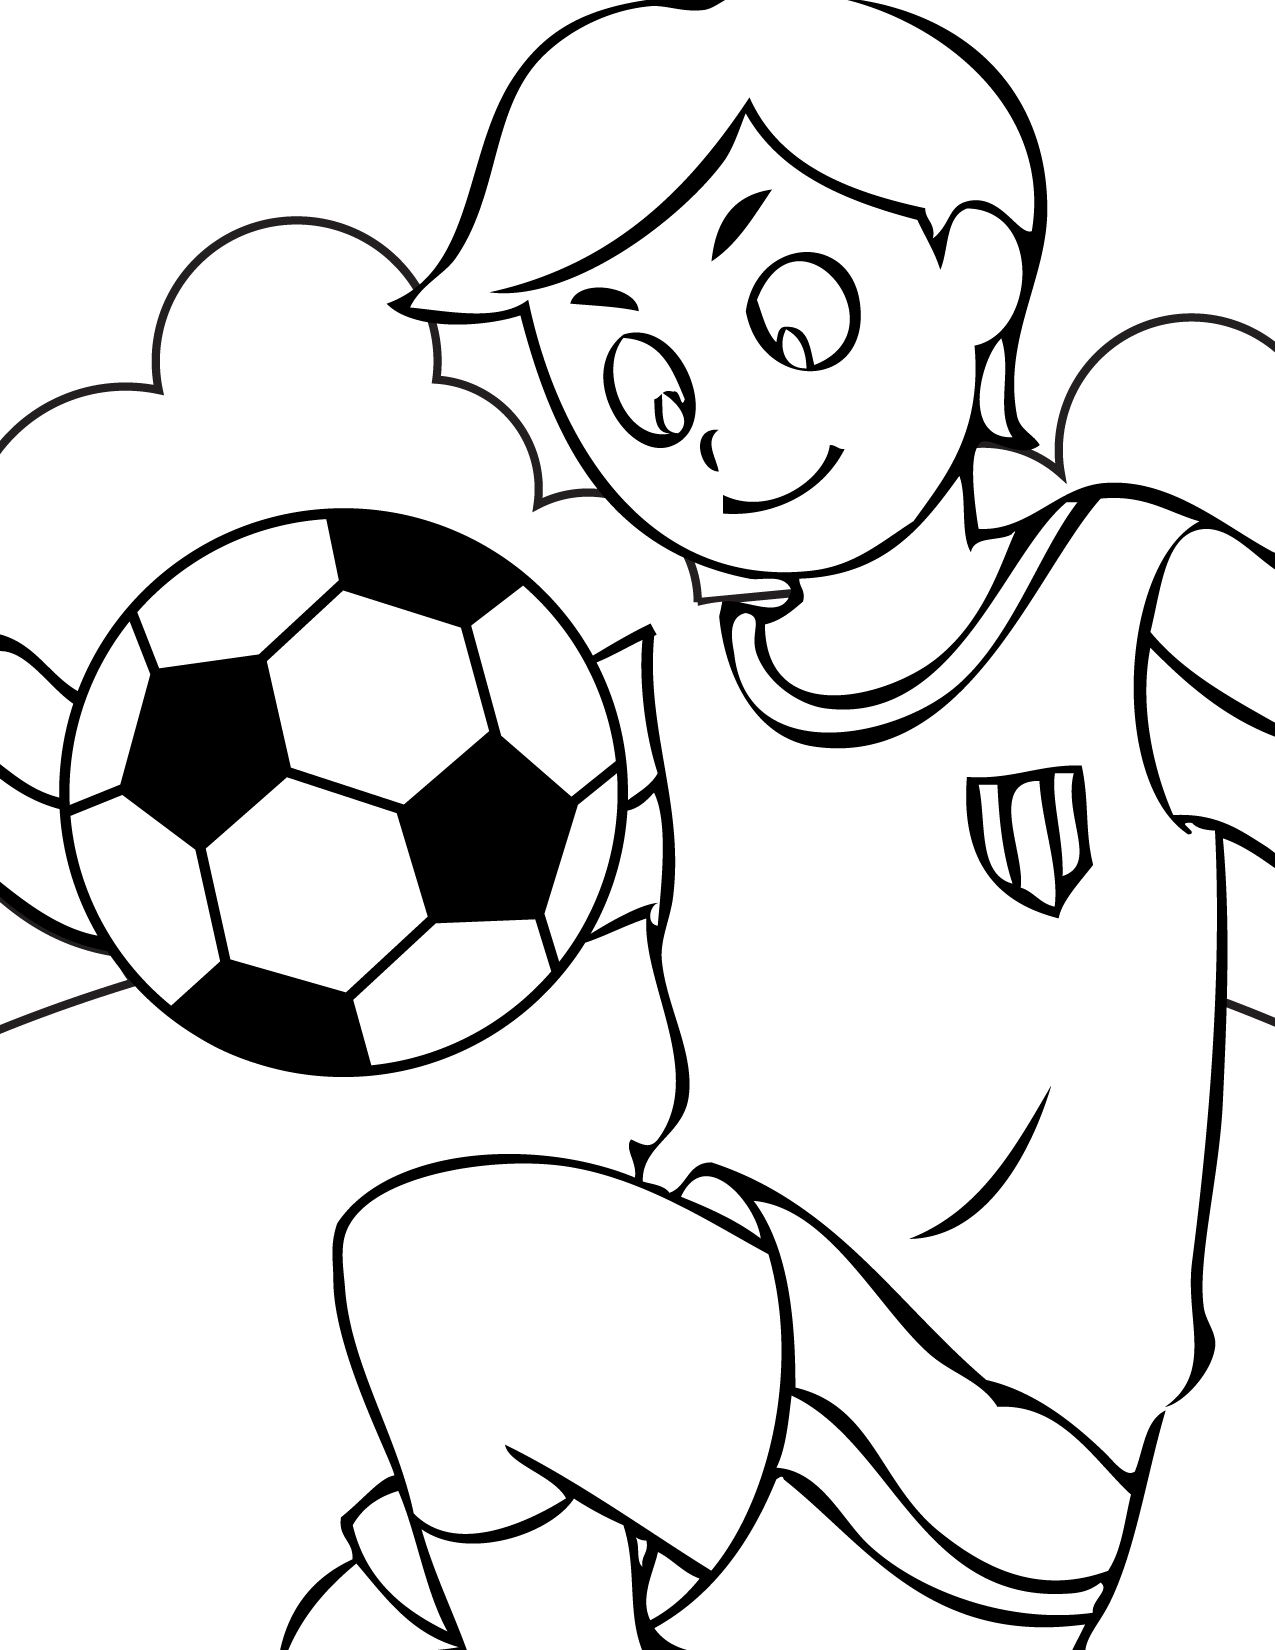 Handipoints Coloring Pages - PrimaryGames. taken from American ...